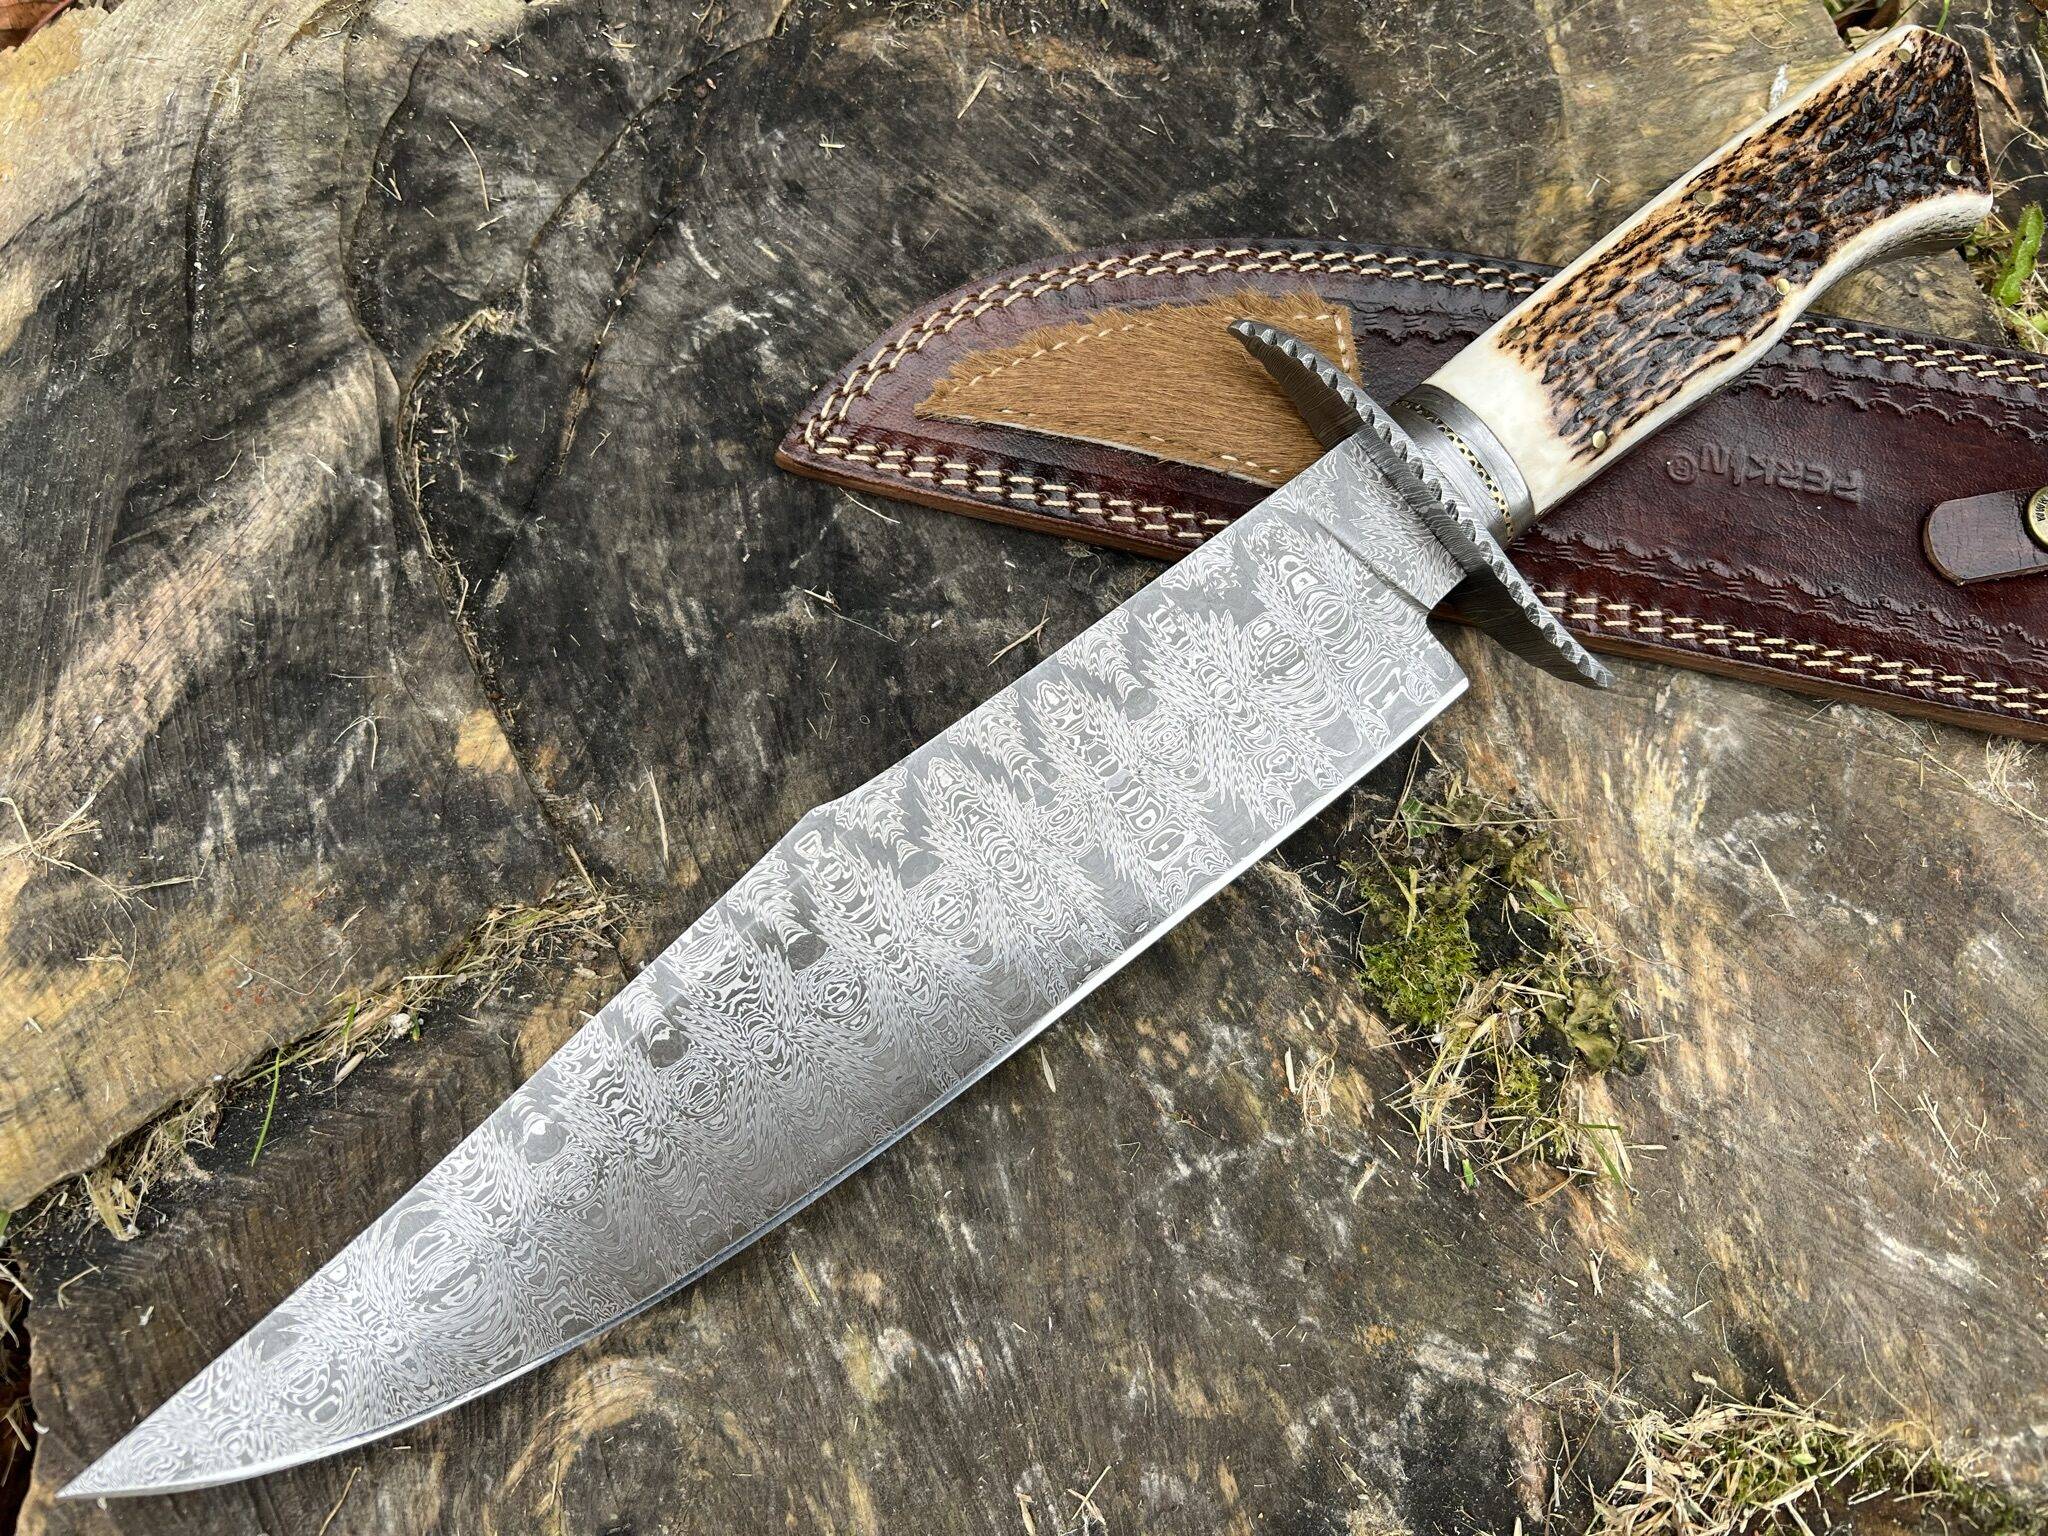 Fixed Blade Hunting Knife Bowie Knife Handmade Stag Antler Handle Unique Pattern One Kind of Handcrafted Hunting Knife